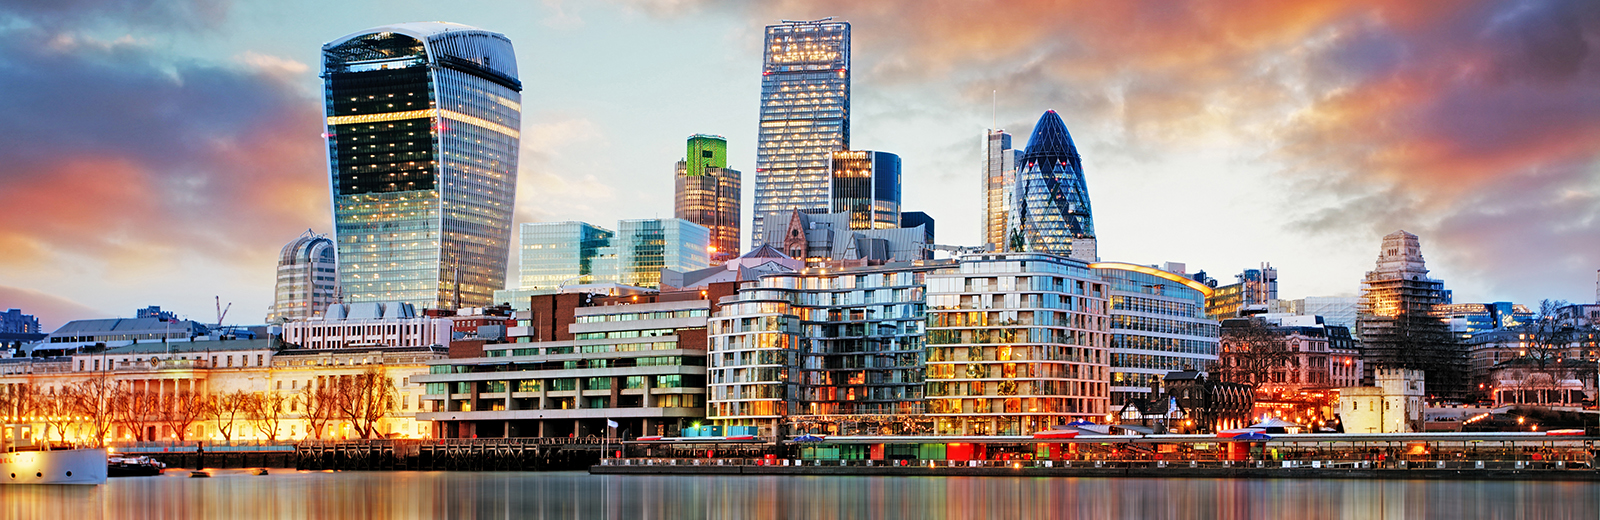 London building skyline by water